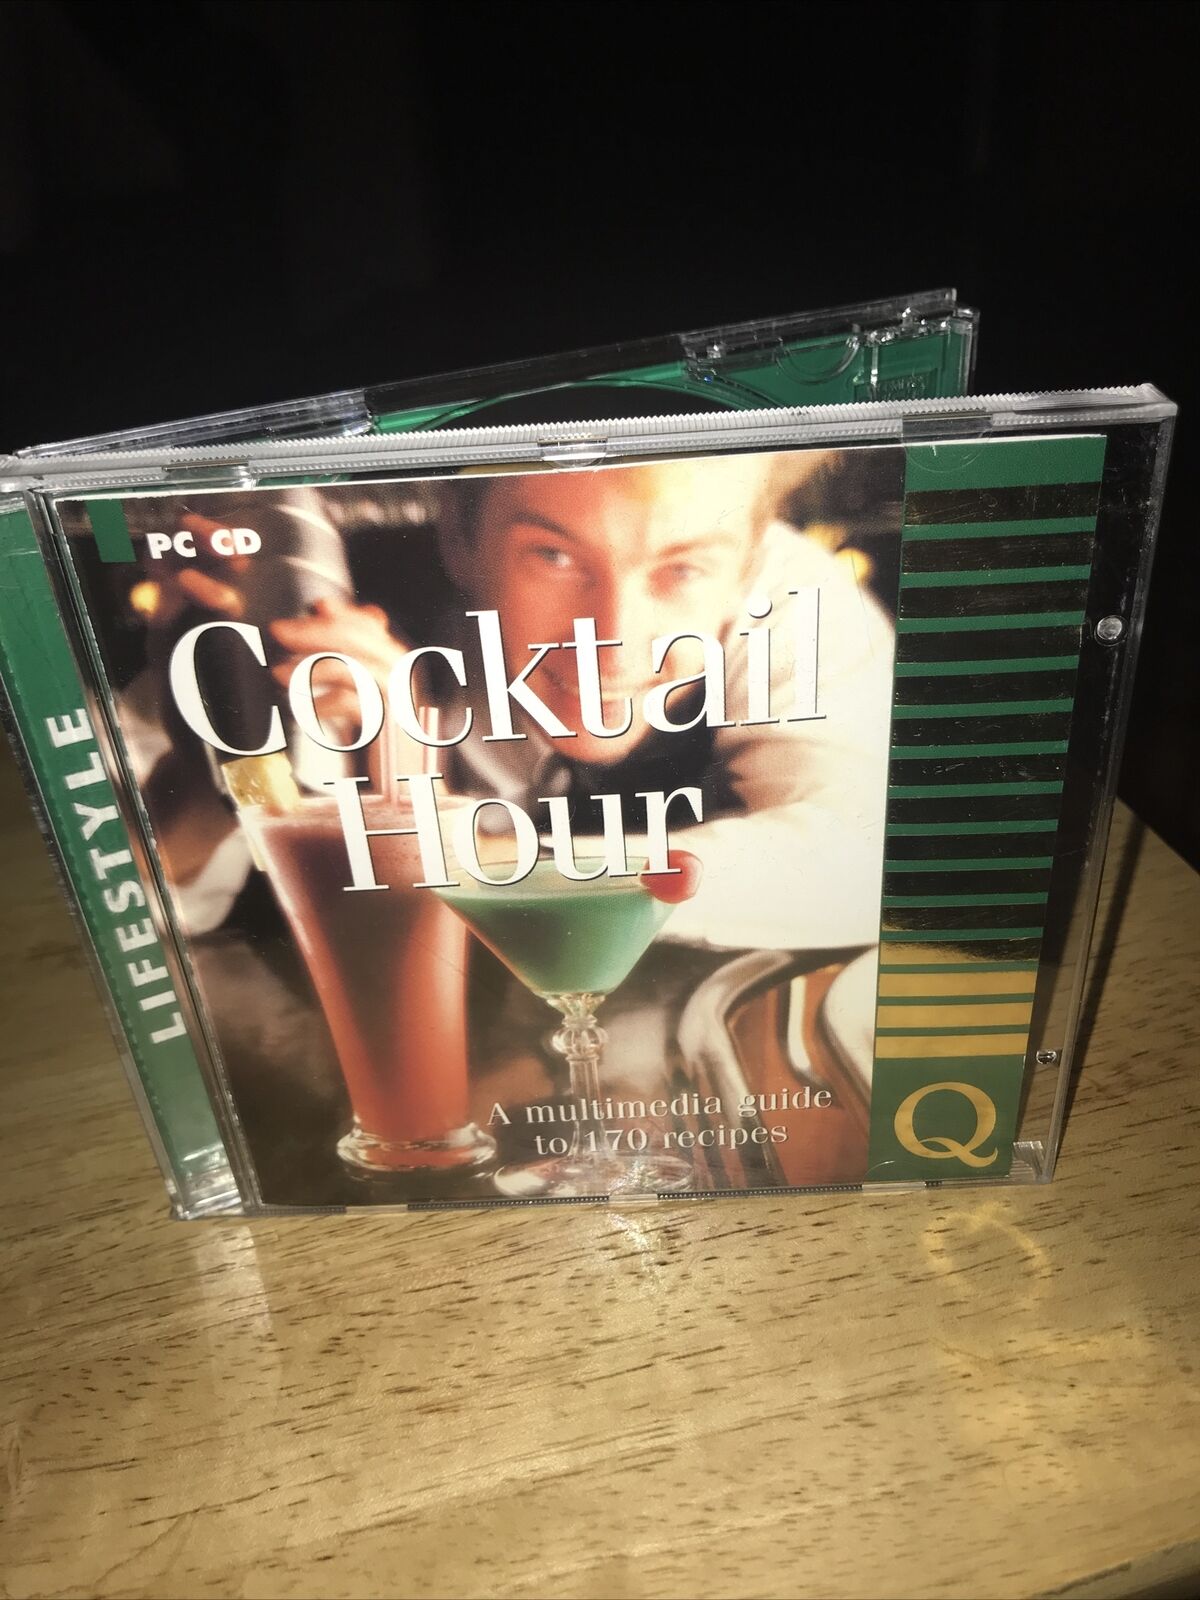 Cocktail Hour Guide To 170 Recipes) (PC-CD, 1998) for Windows